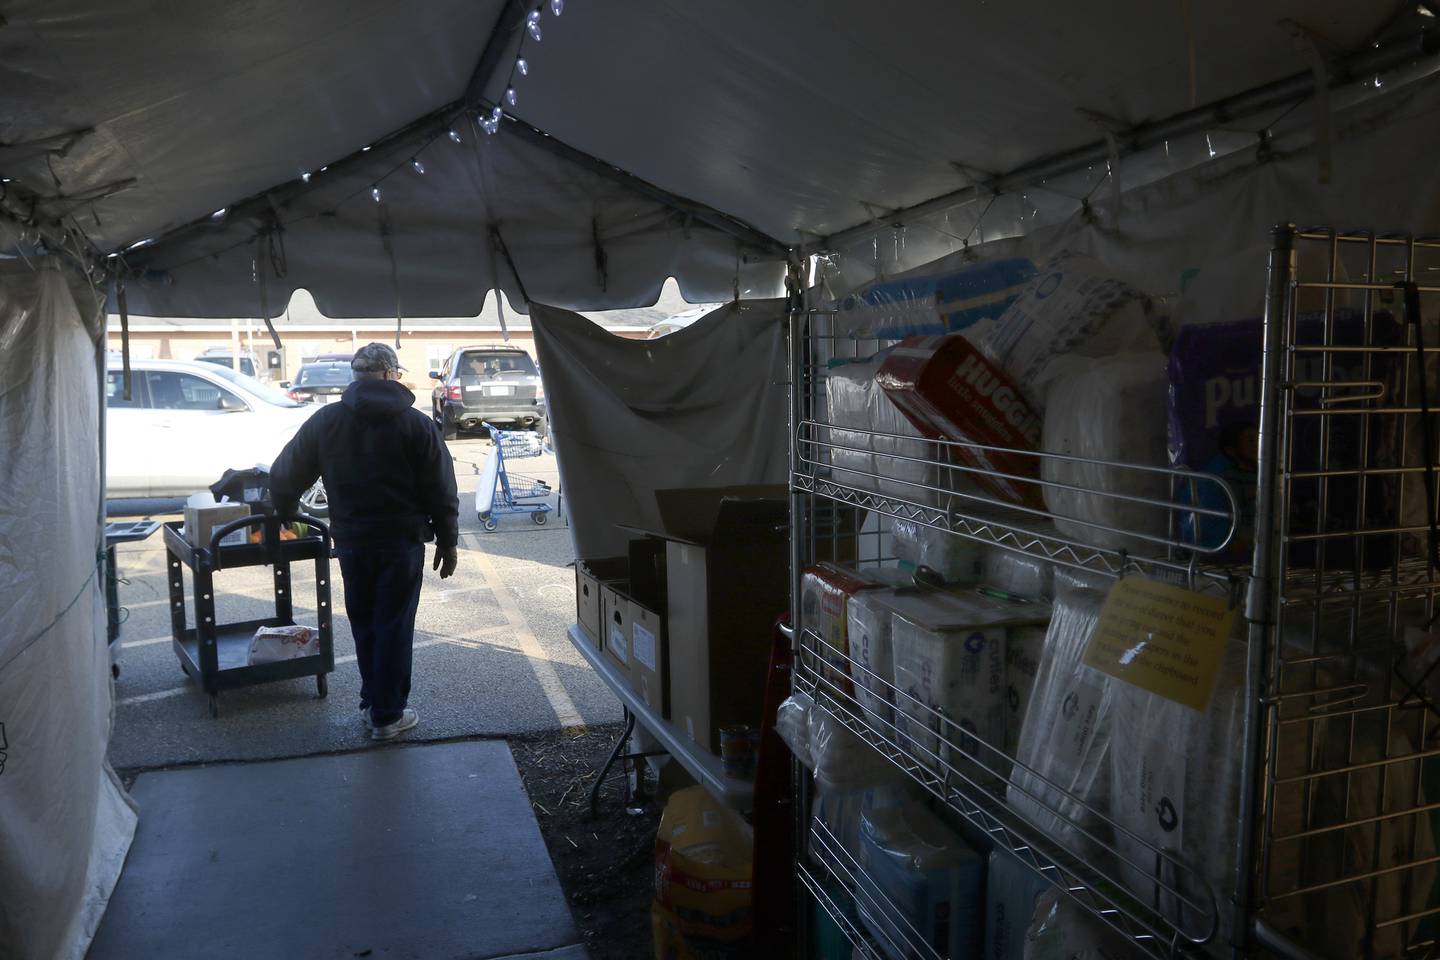 Volunteer Tom Zorn waits in the tent attached to the FISH of McHenry Food Pantry, 3515 N. Richmond Road in Johnsburg, with a cart of food to give to a recipient on Tuesday, Jan. 10, 2023. The pantry, which has changed how it distributes food since the COVID-19 pandemic, is now raising $150,000 to add more storage and a heated garage onto the building.